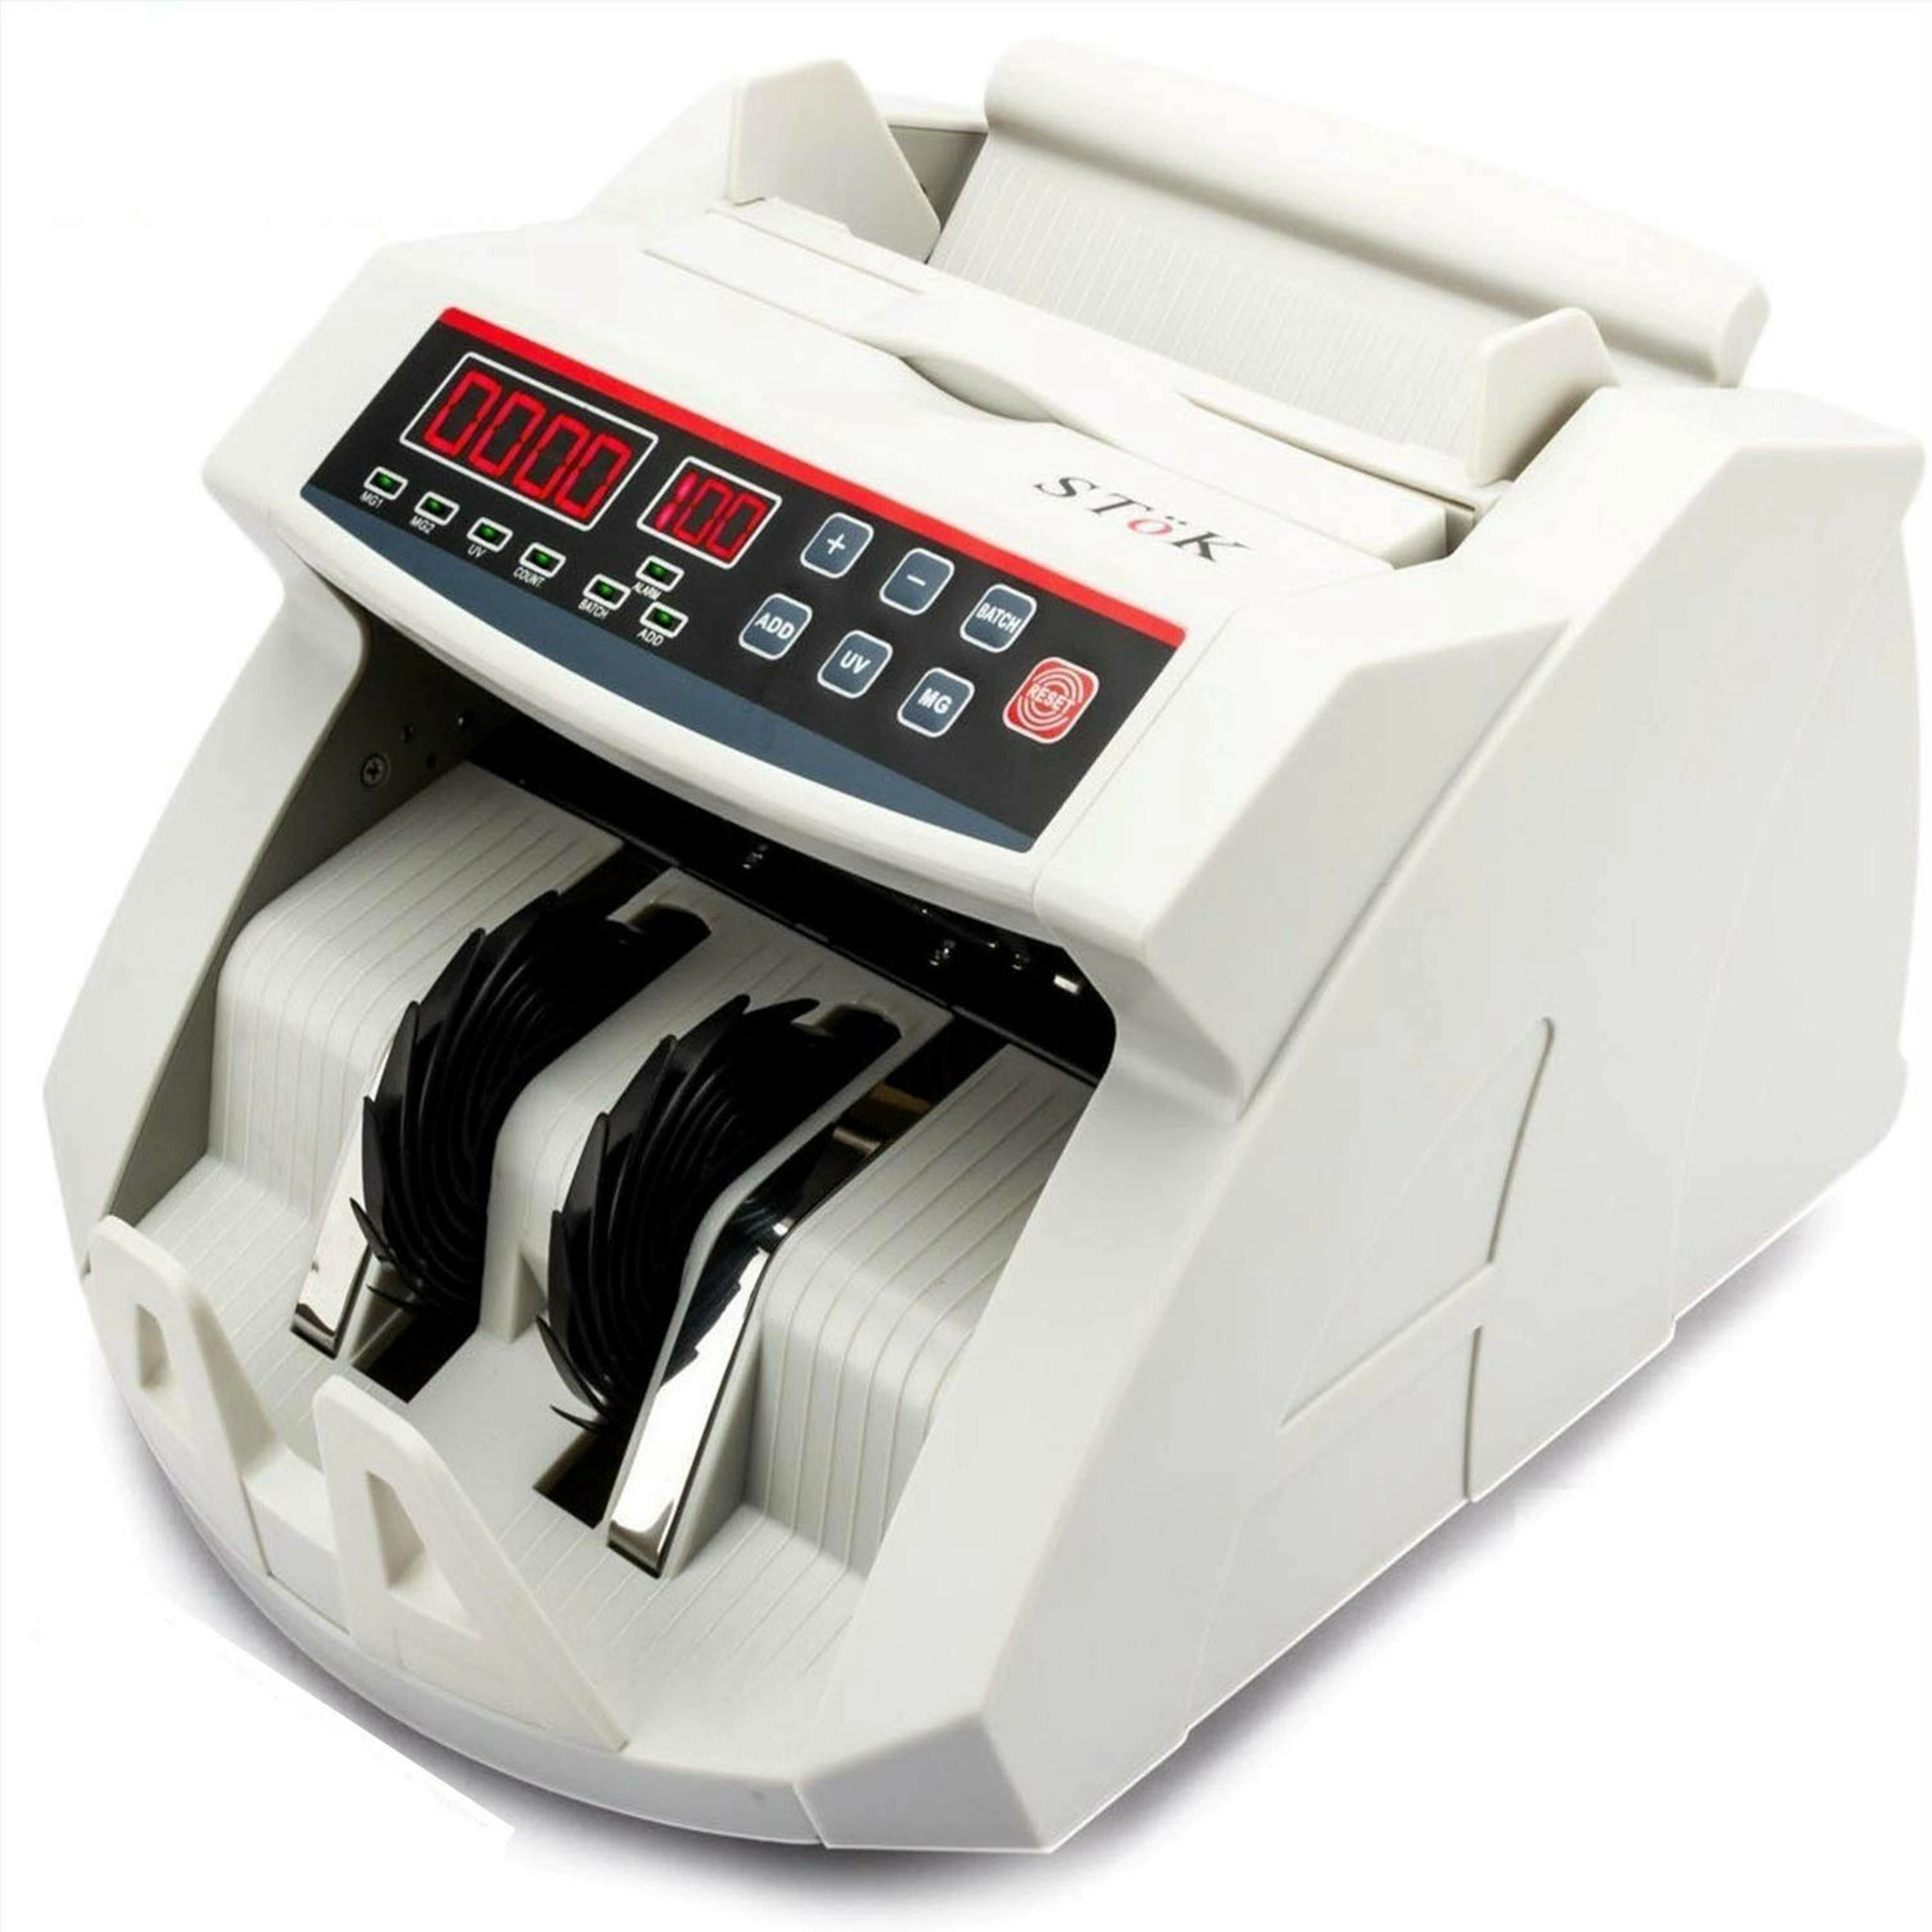 Bill Counting Machine with Add & Batch Modes LCD Display Real Money Counting 1,000 Bills/Min Money Counter Machine with UV/MG/IR Counterfeit Detection 